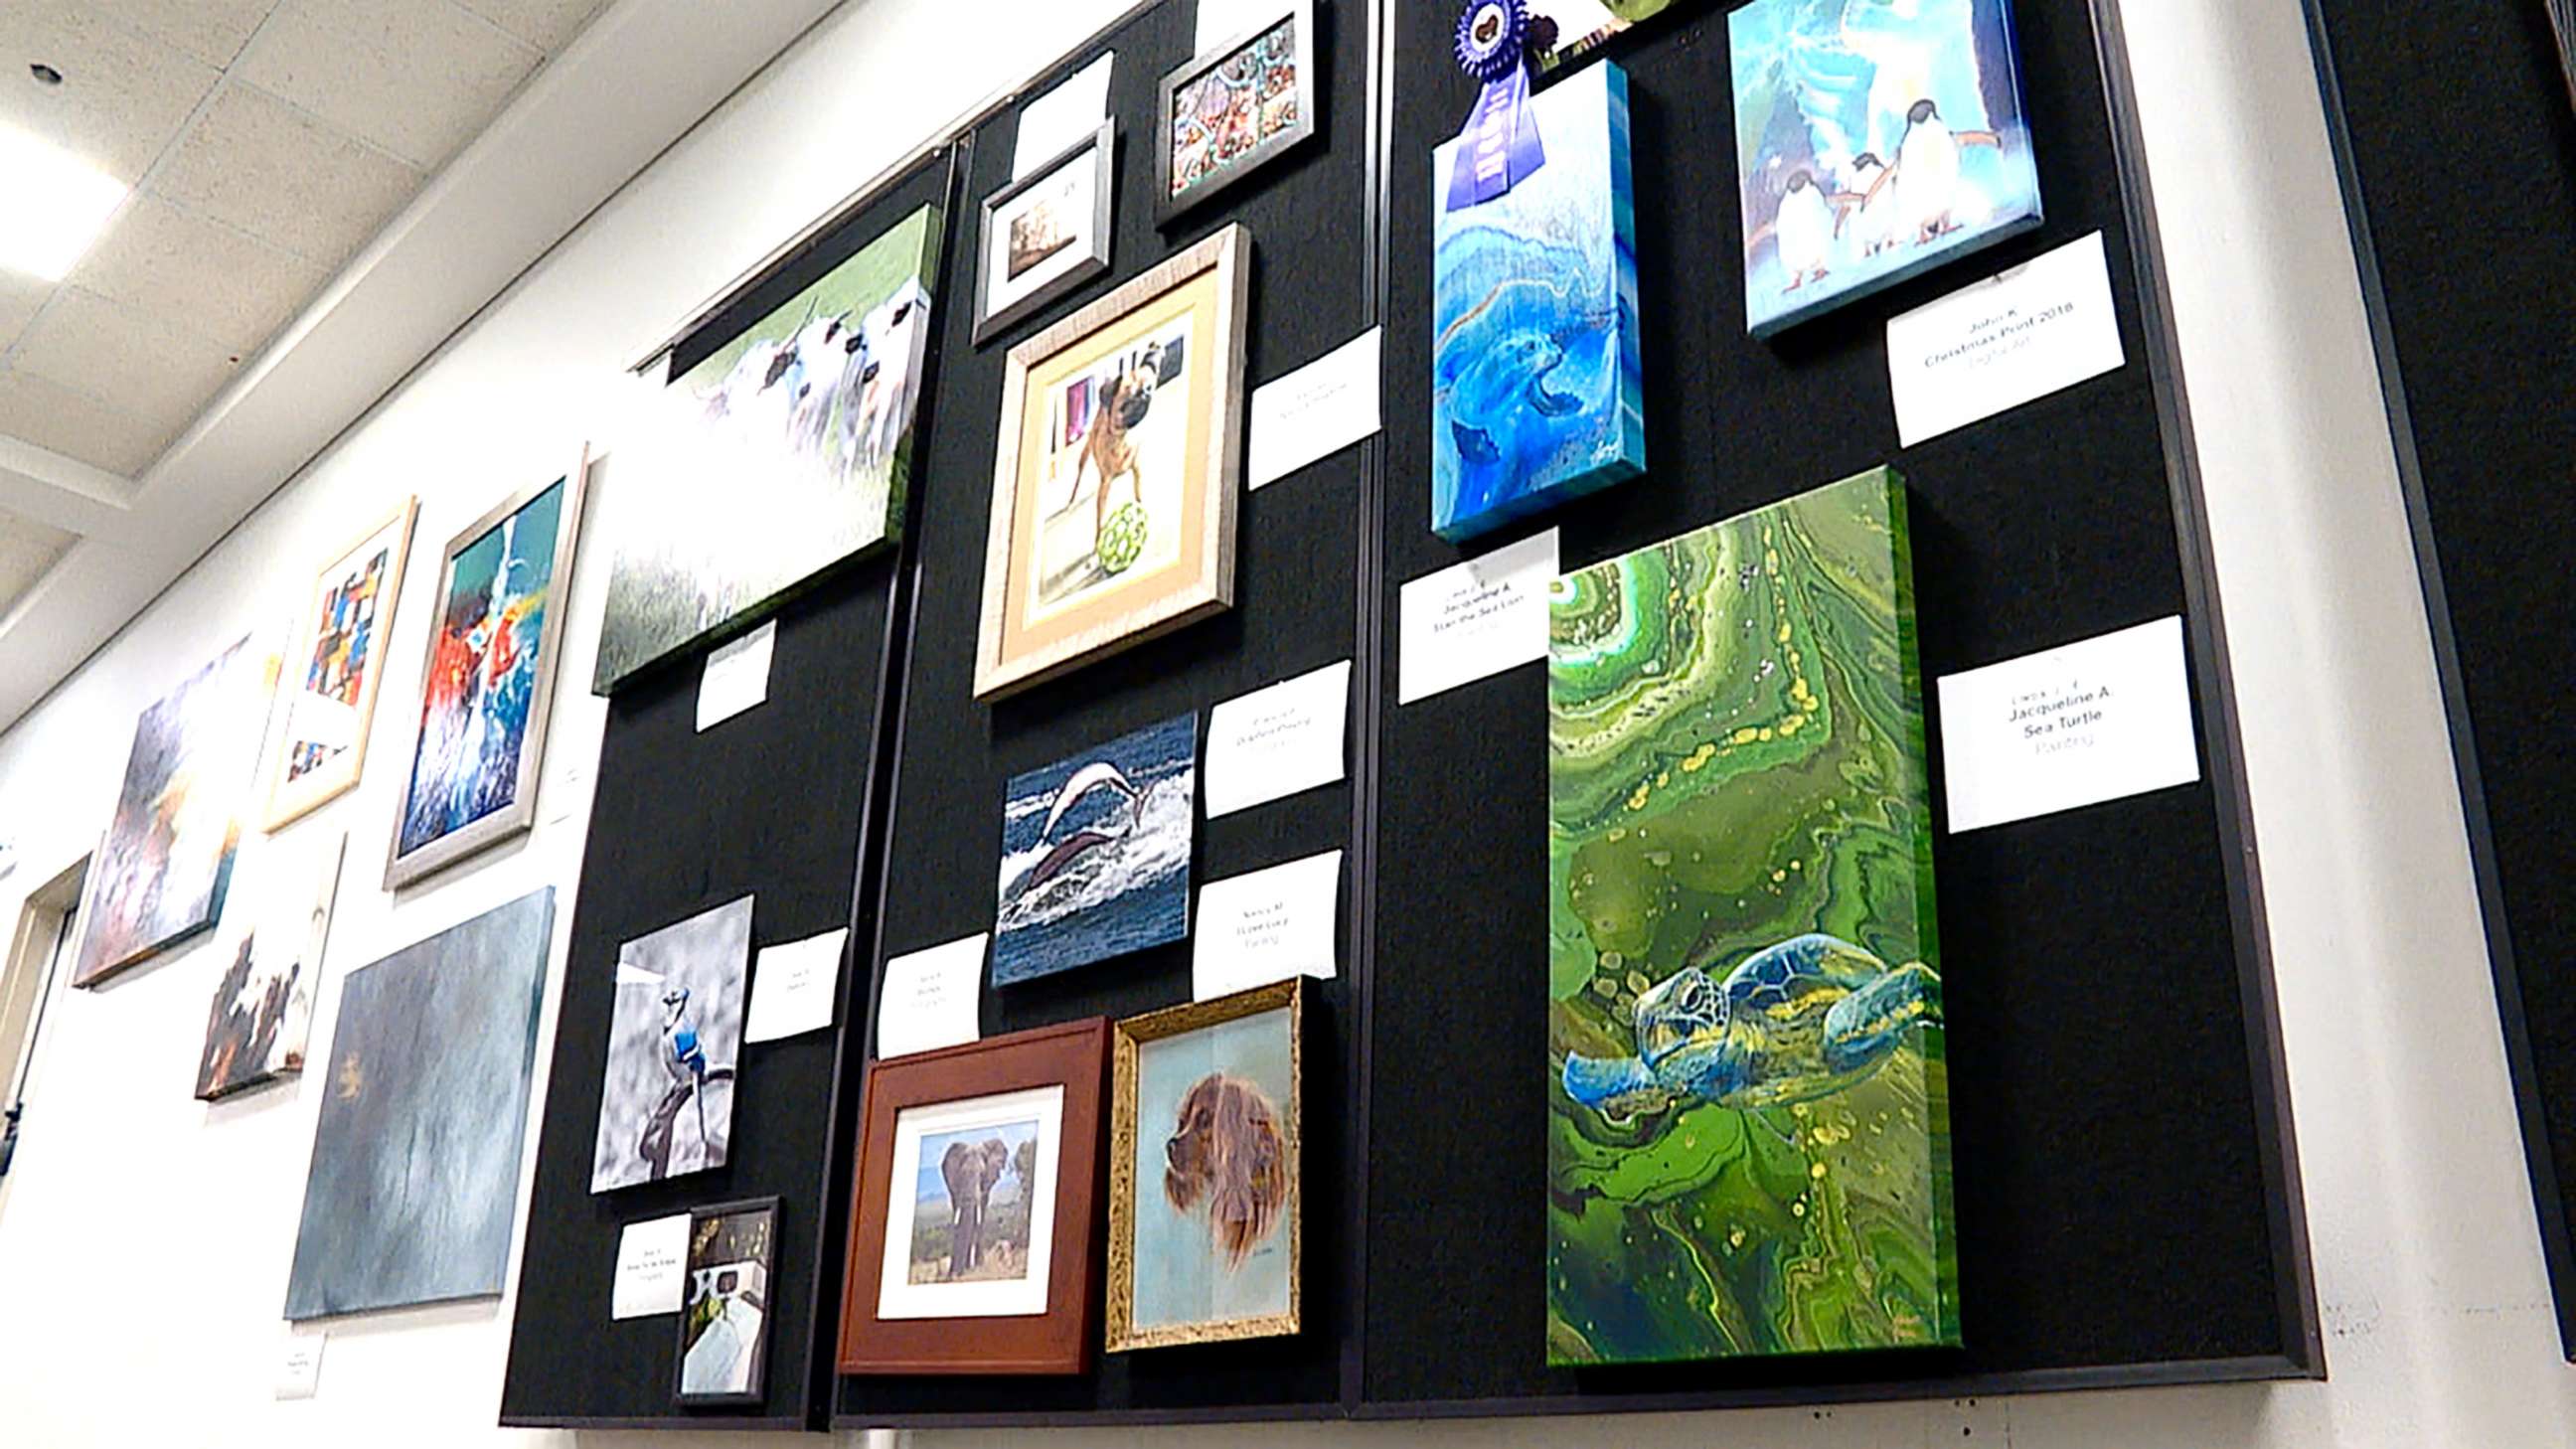 PHOTO: For two decades, the Central Intelligence Agency has quietly hosted an annual art show at its headquarters, featuring works by the agency's officers and analysts who publicly share rare personal details about their lives. 